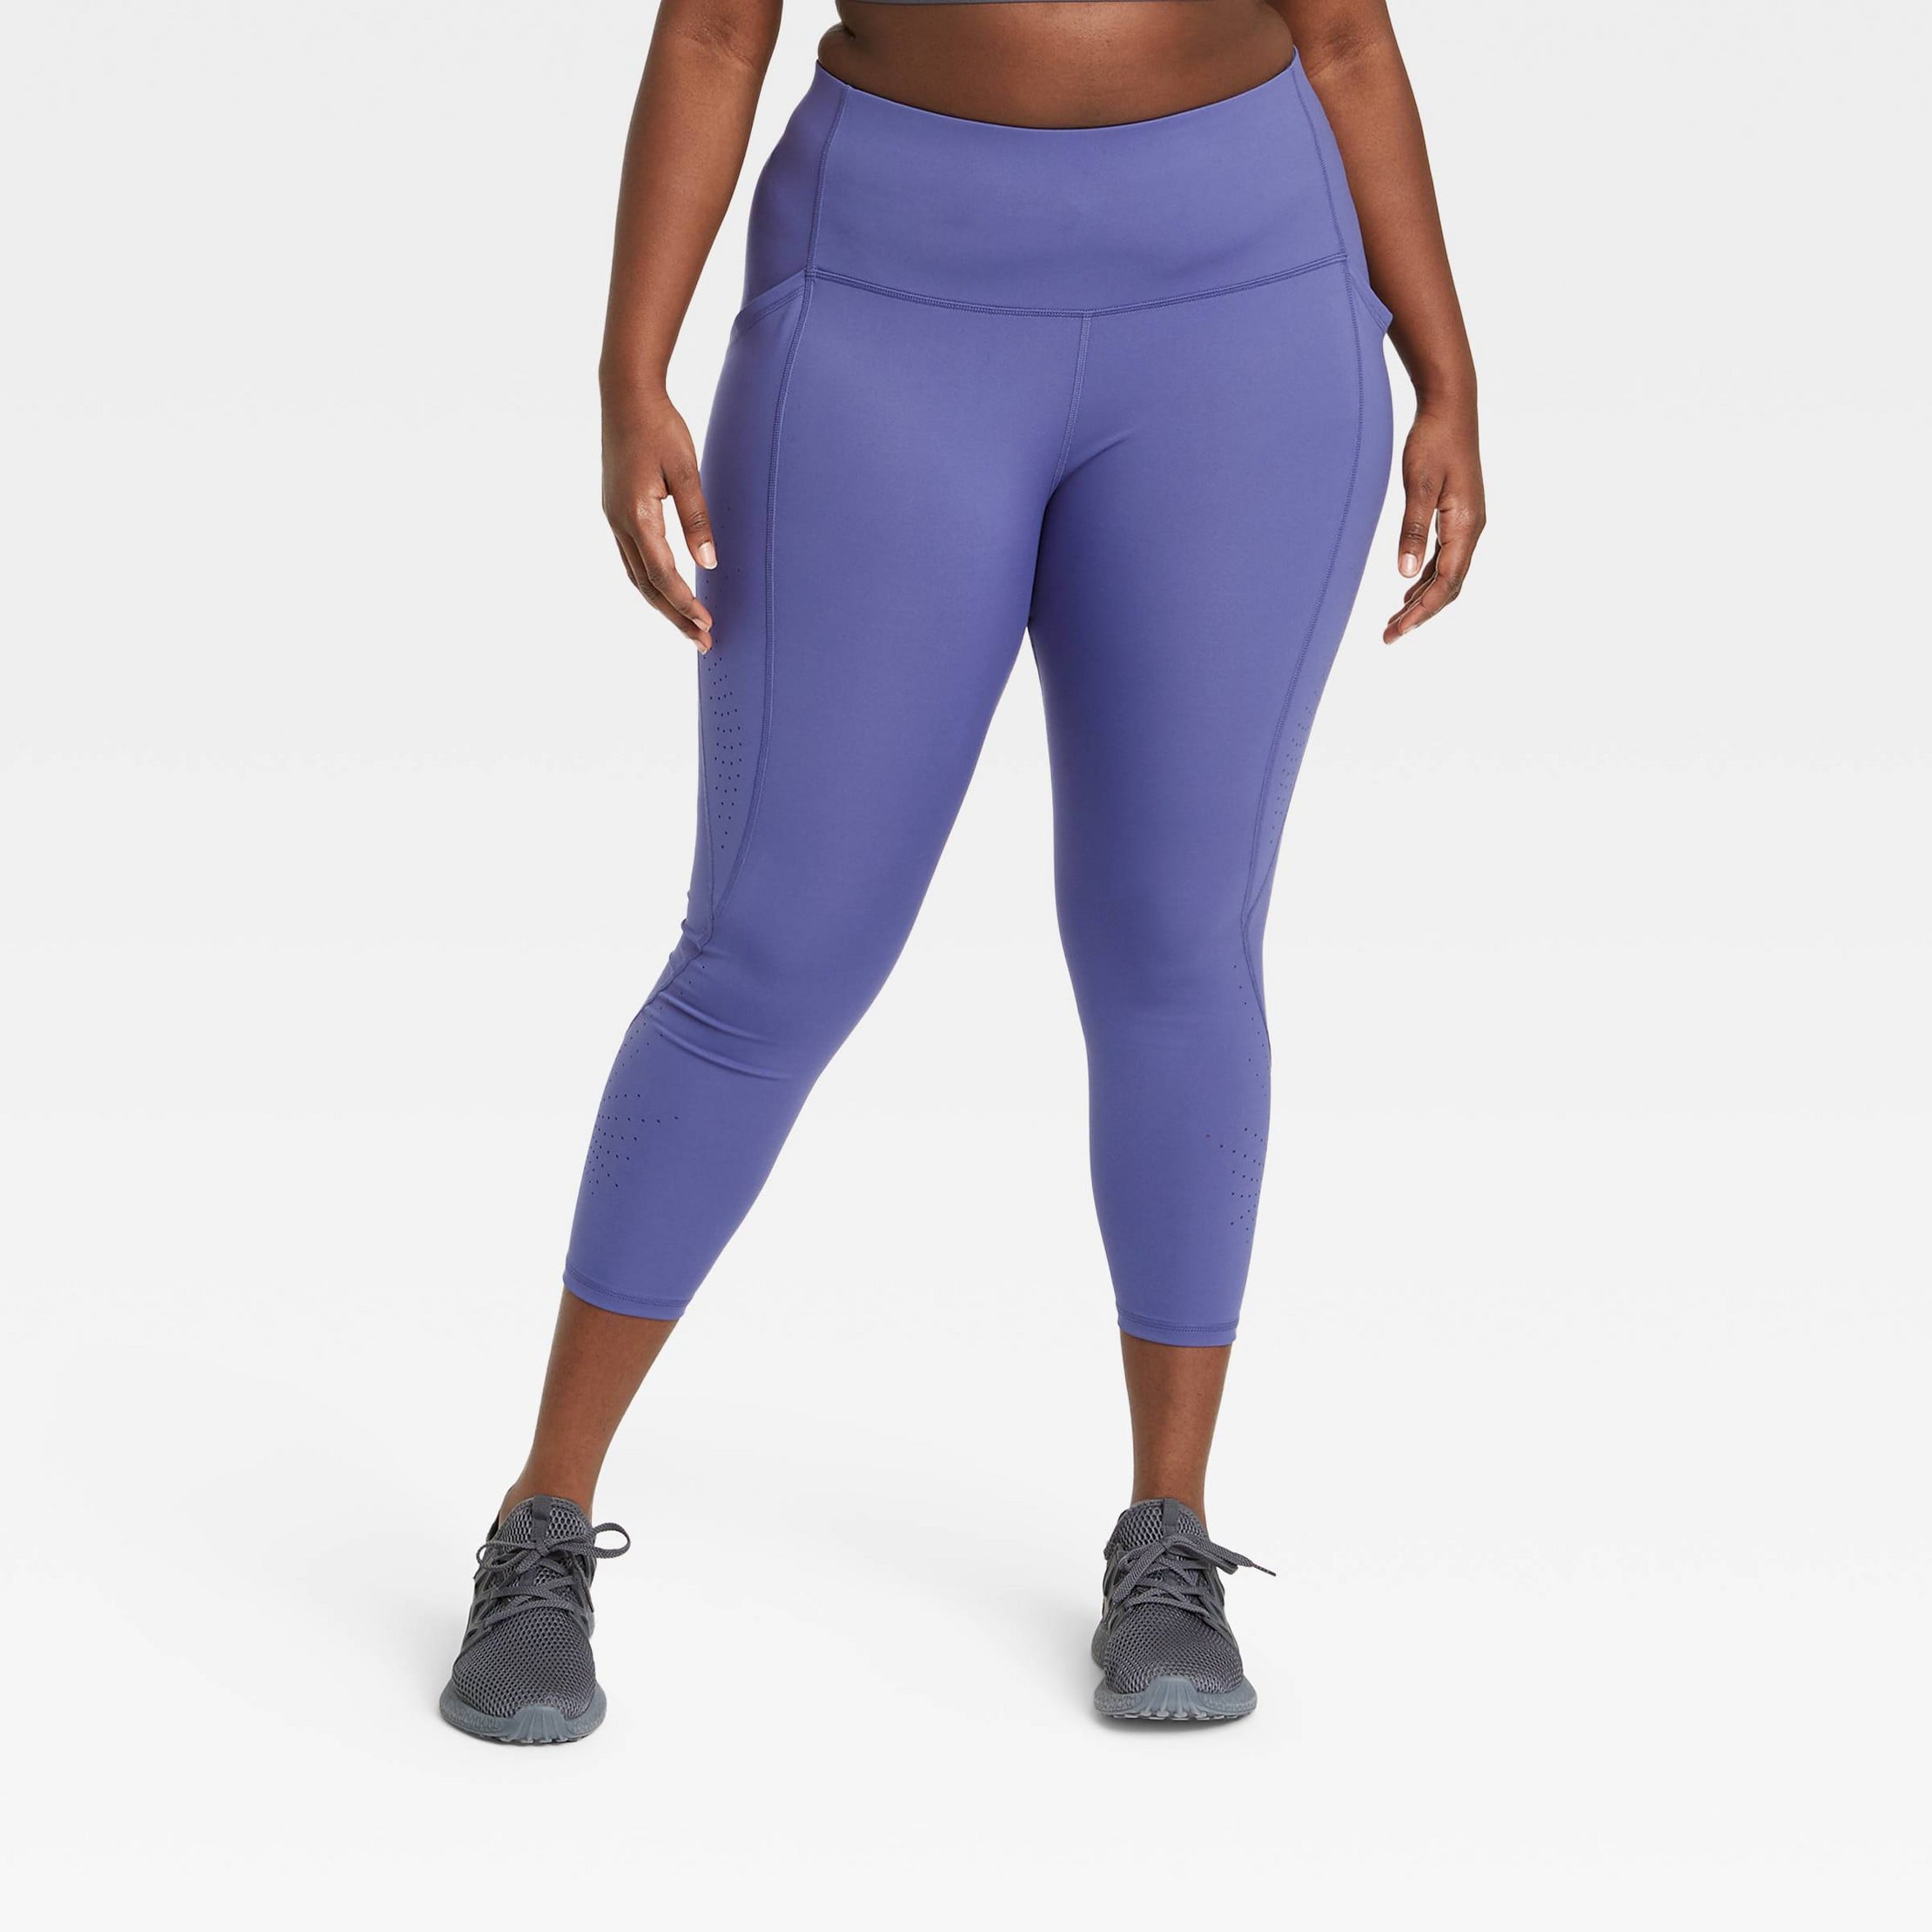 Target Workout Leggings Try On Haul + In Depth Review, UNDER $35